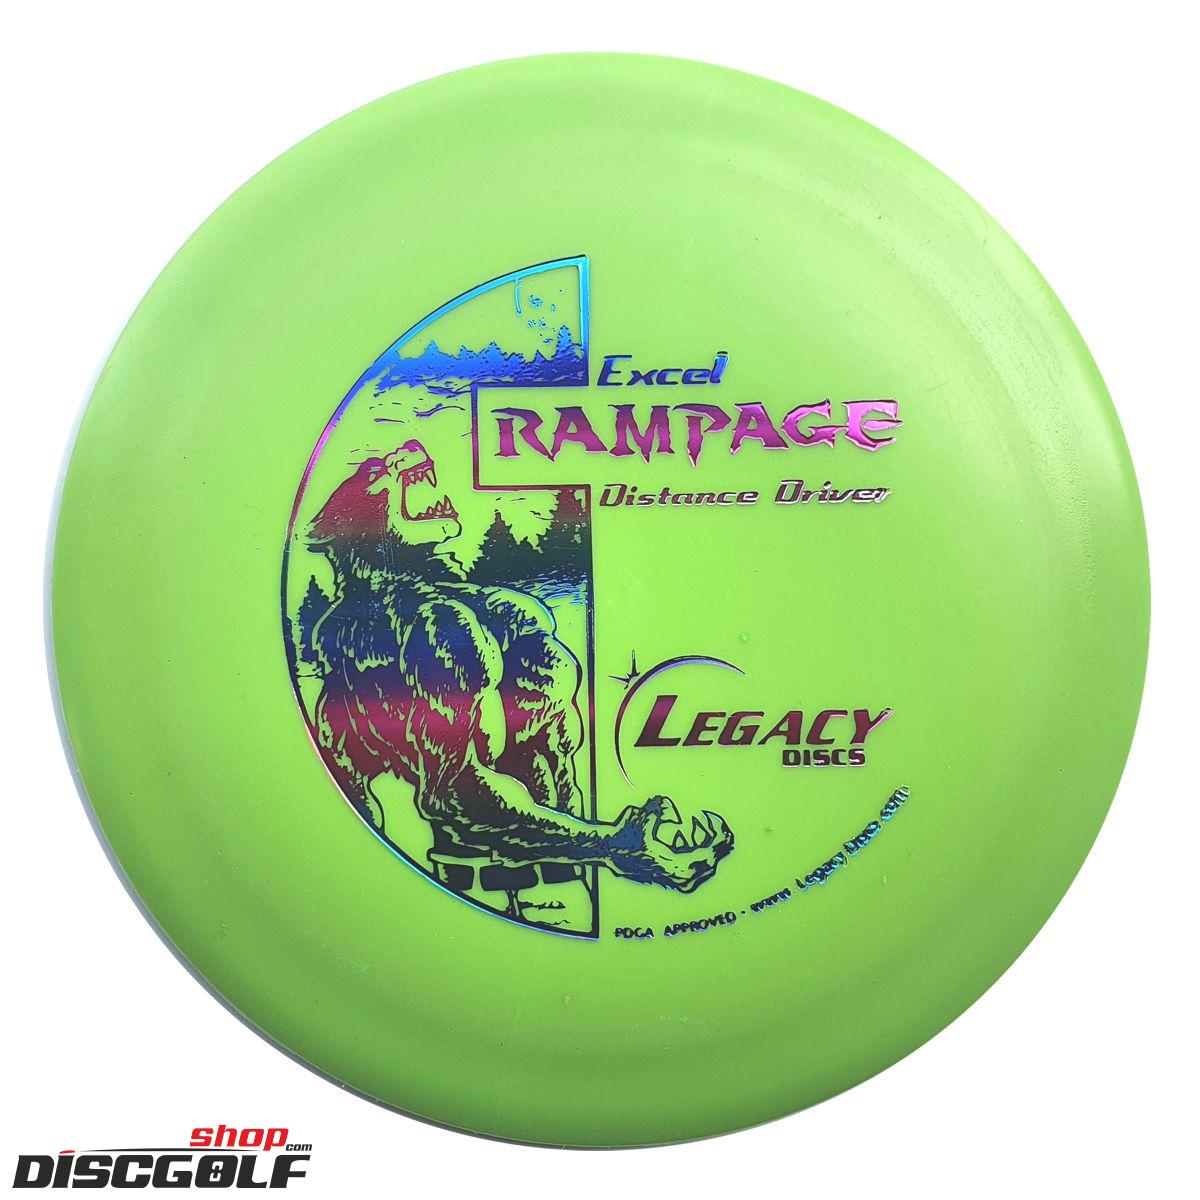 Legacy Discs Rampage Excel (discgolf)